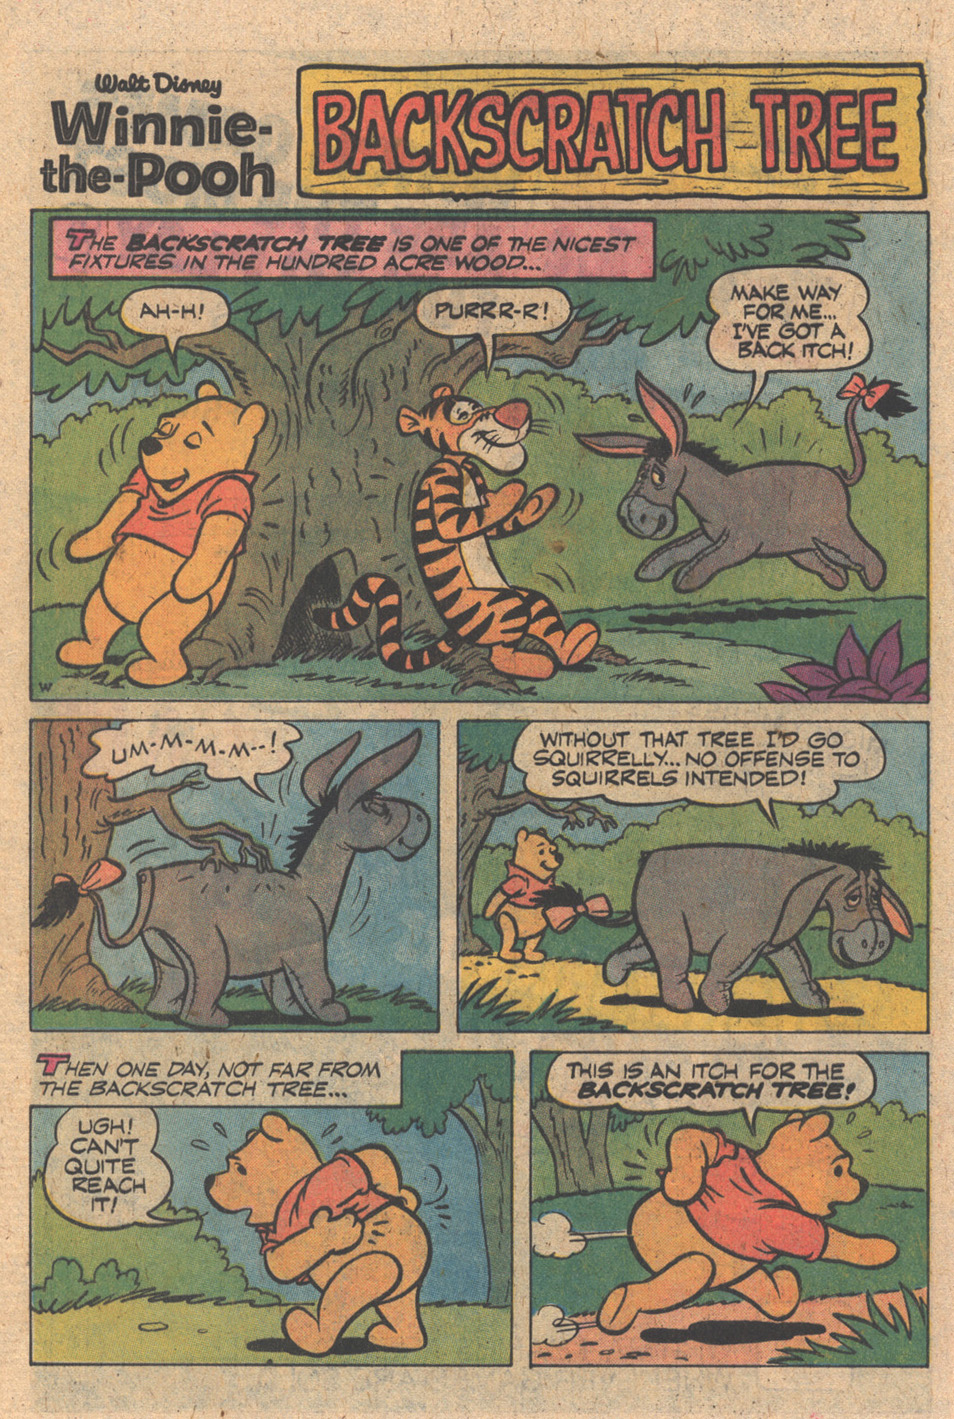 Read online Winnie-the-Pooh comic -  Issue #5 - 24